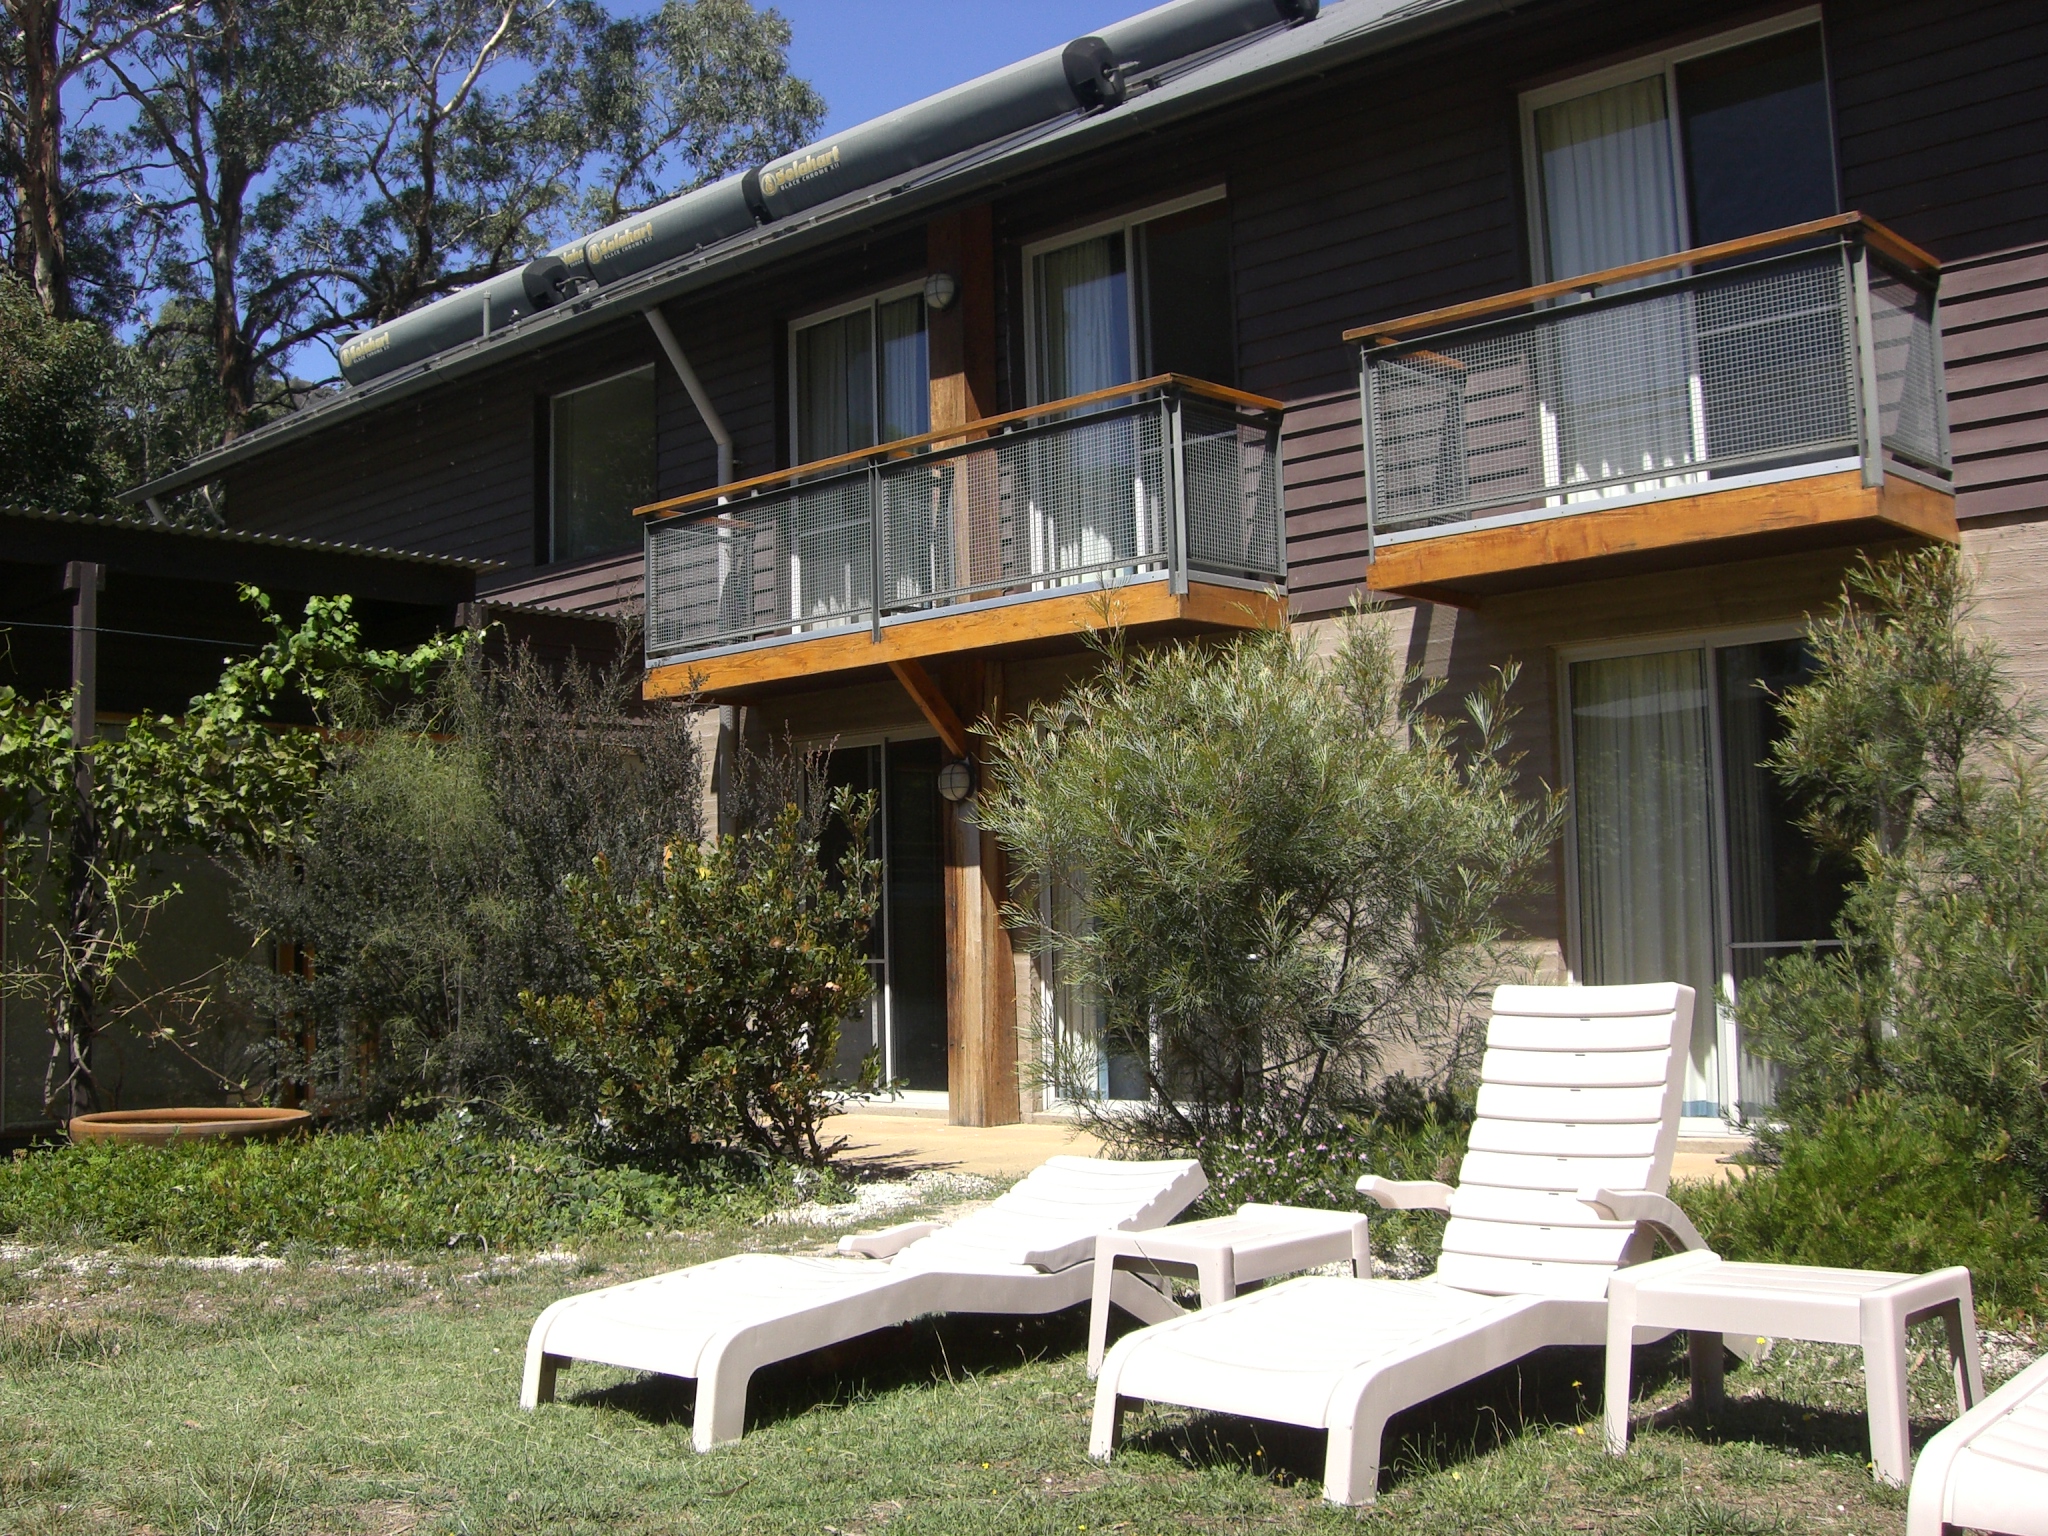 The Awesome YHA Eco-Hostel In Halls Gap